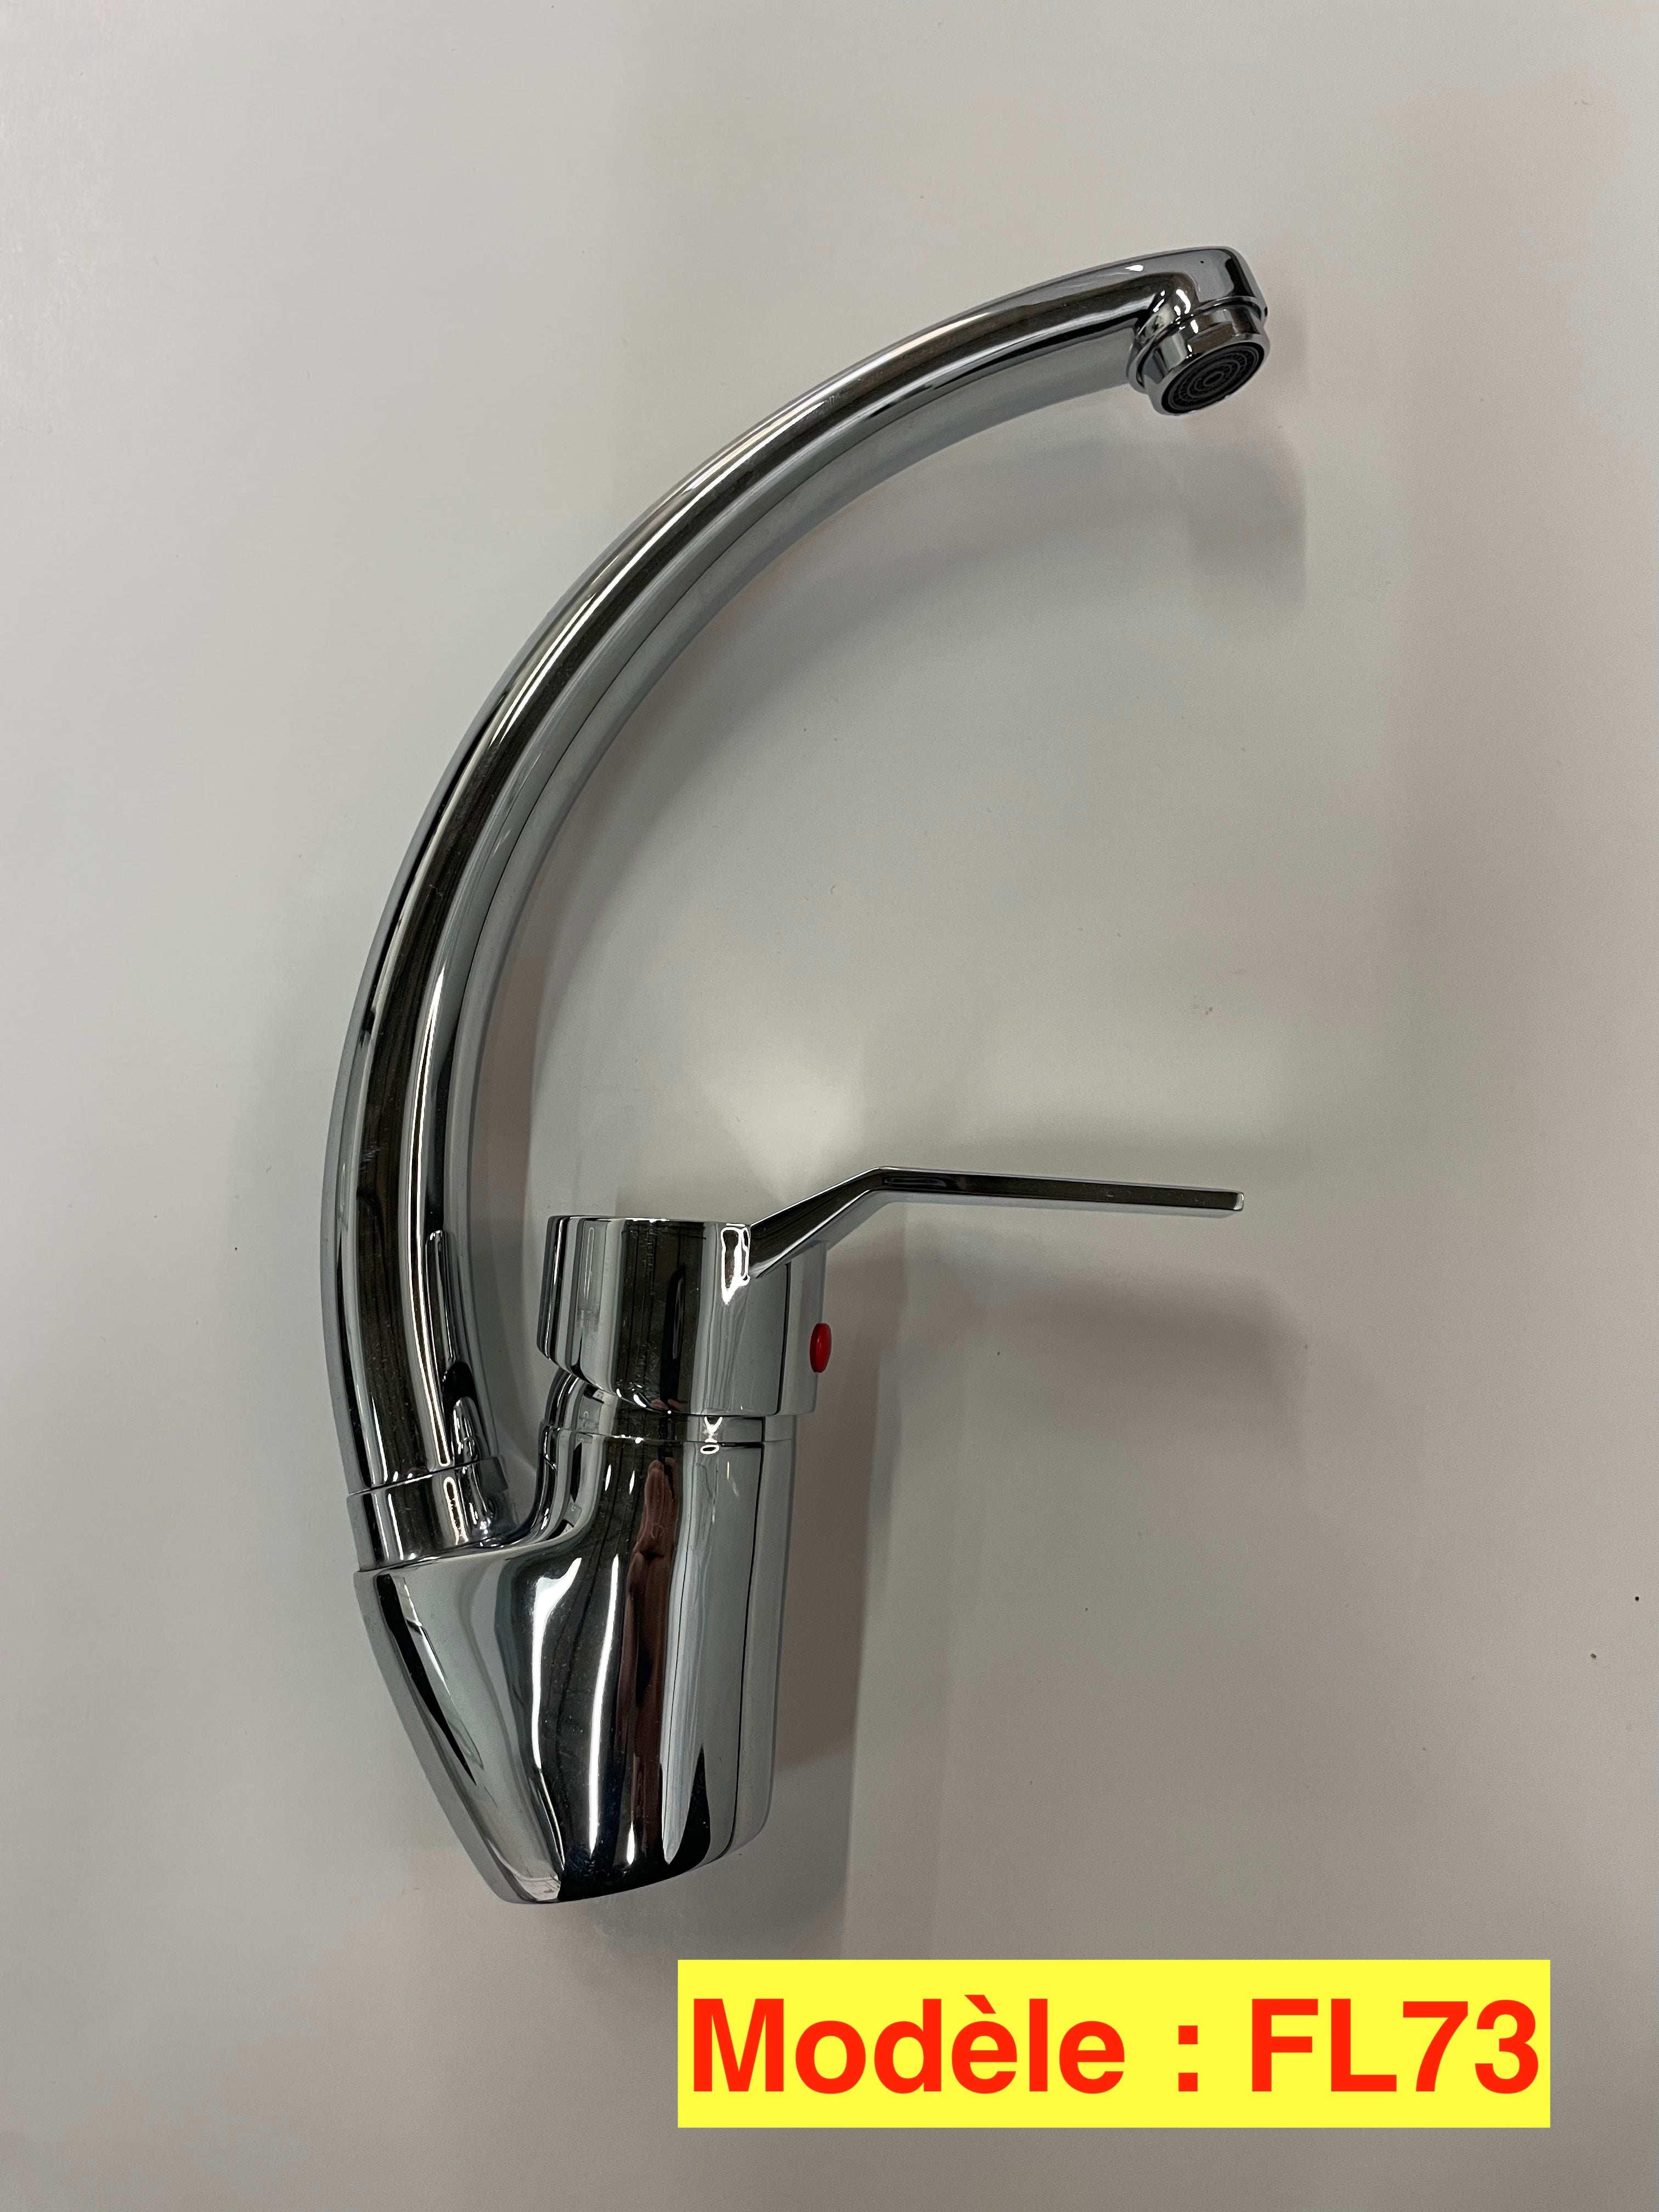 DISCONTINUED KITCHEN FAUCETS - LIQUIDATION